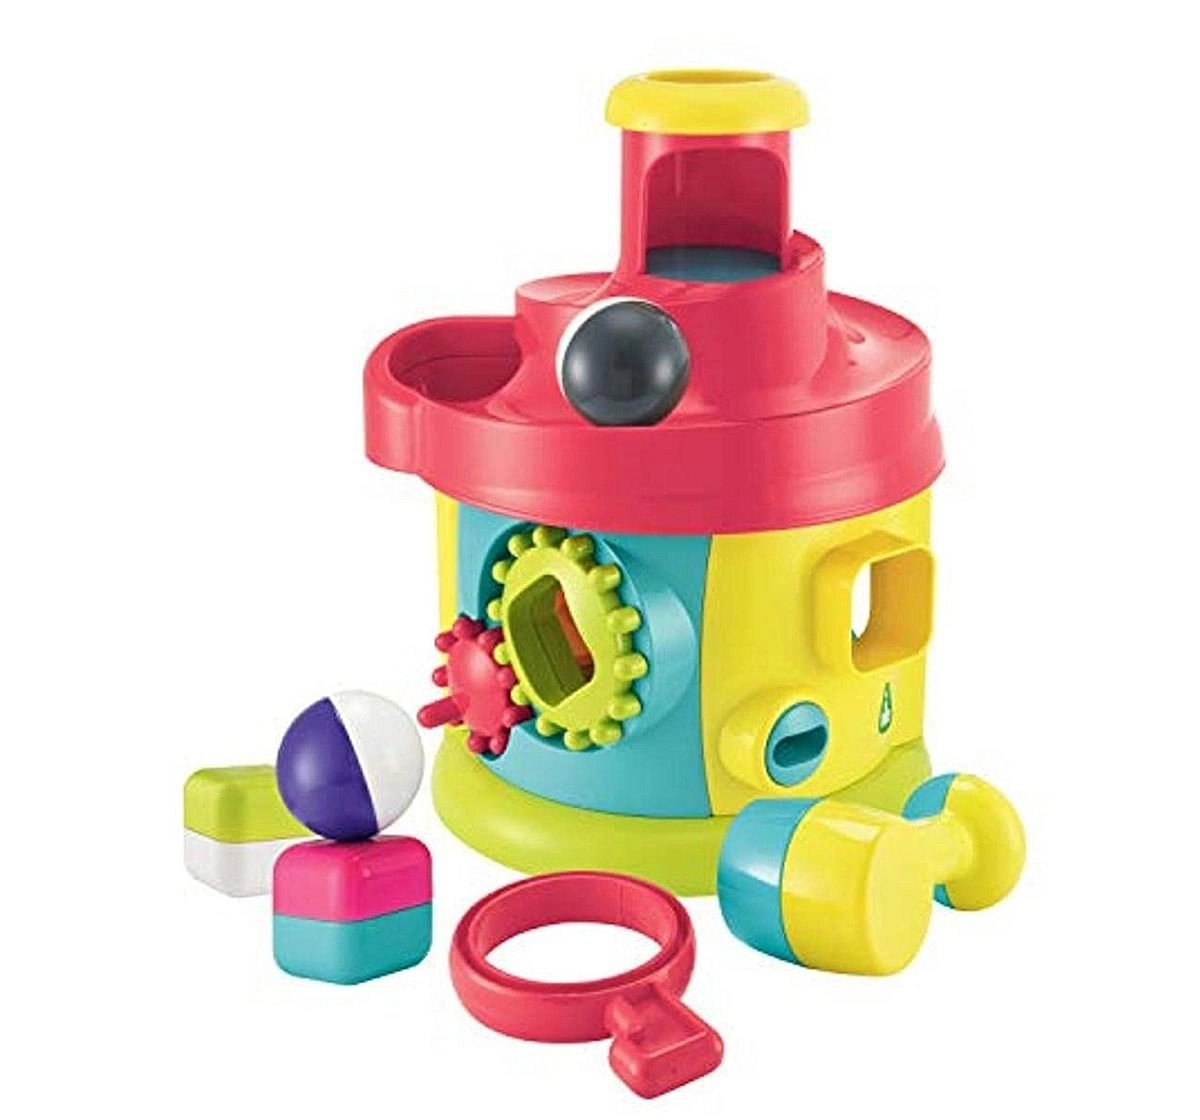 ELC Twist and Turn House Activity Game for Kids 12M+, Multicolour